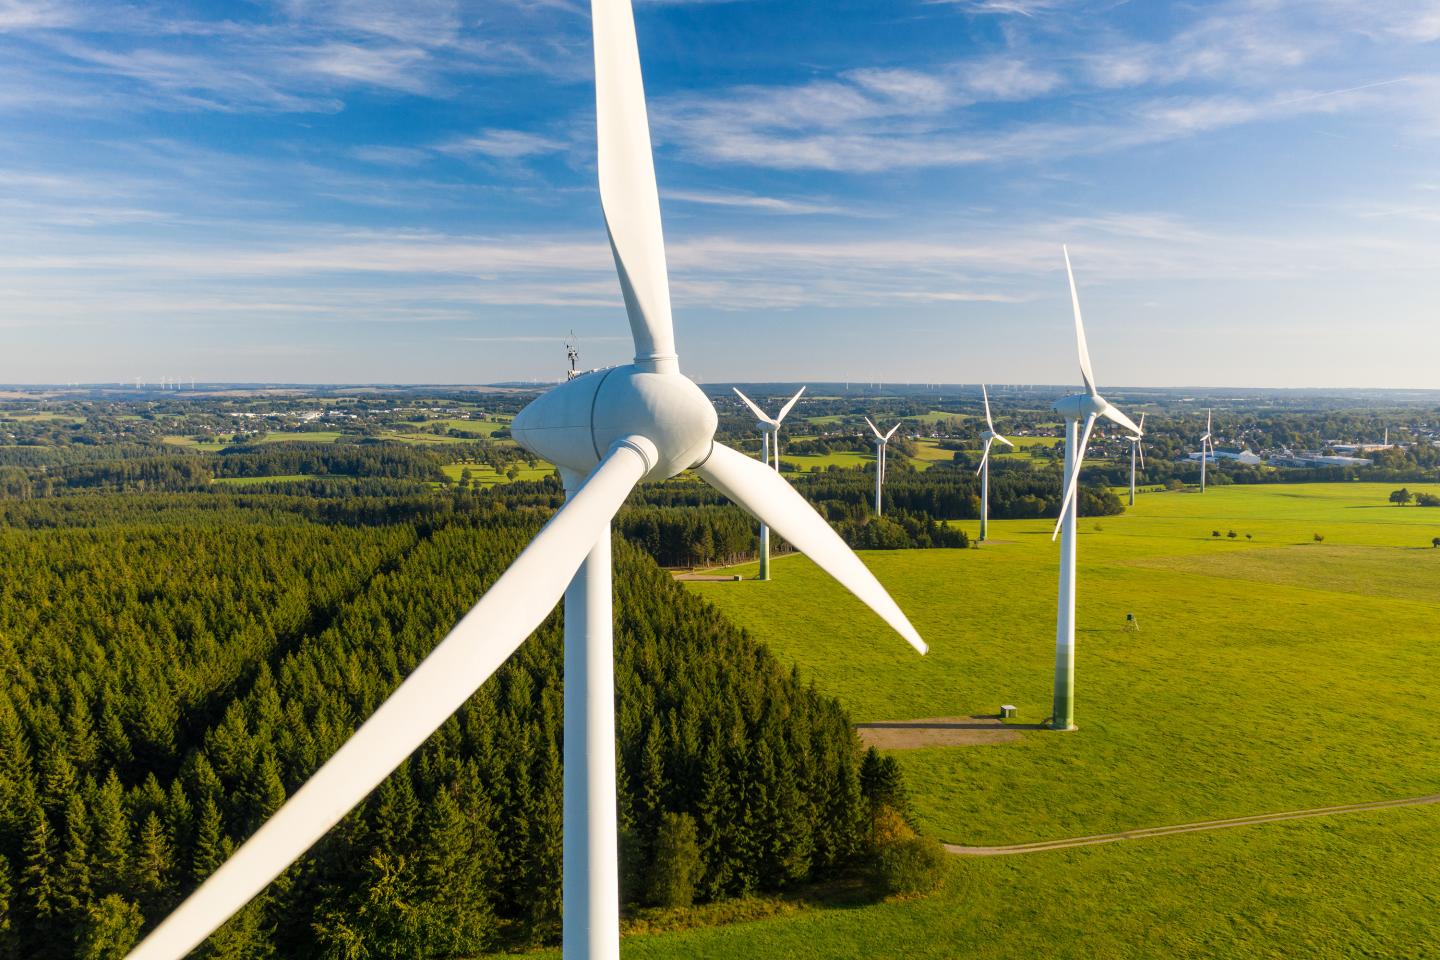 New project will lay groundwork for open access to massive windfarm